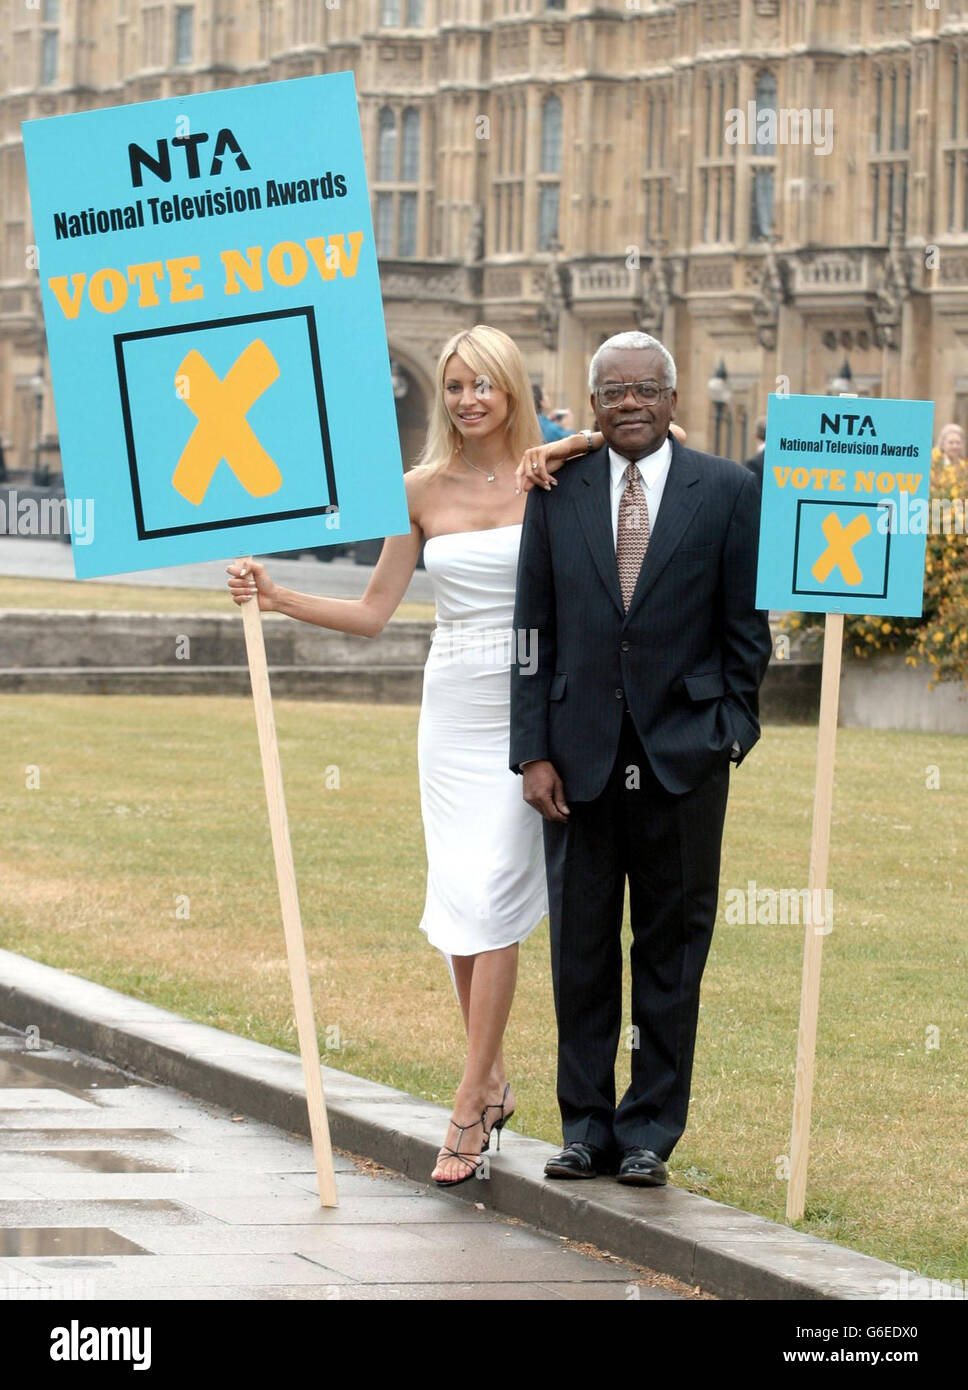 Sir Trevor McDonald and Tess Daly in Abingdon Gardens Westminster, London to mark the commencment of voting for the National Television Awards (NTA). Stock Photo